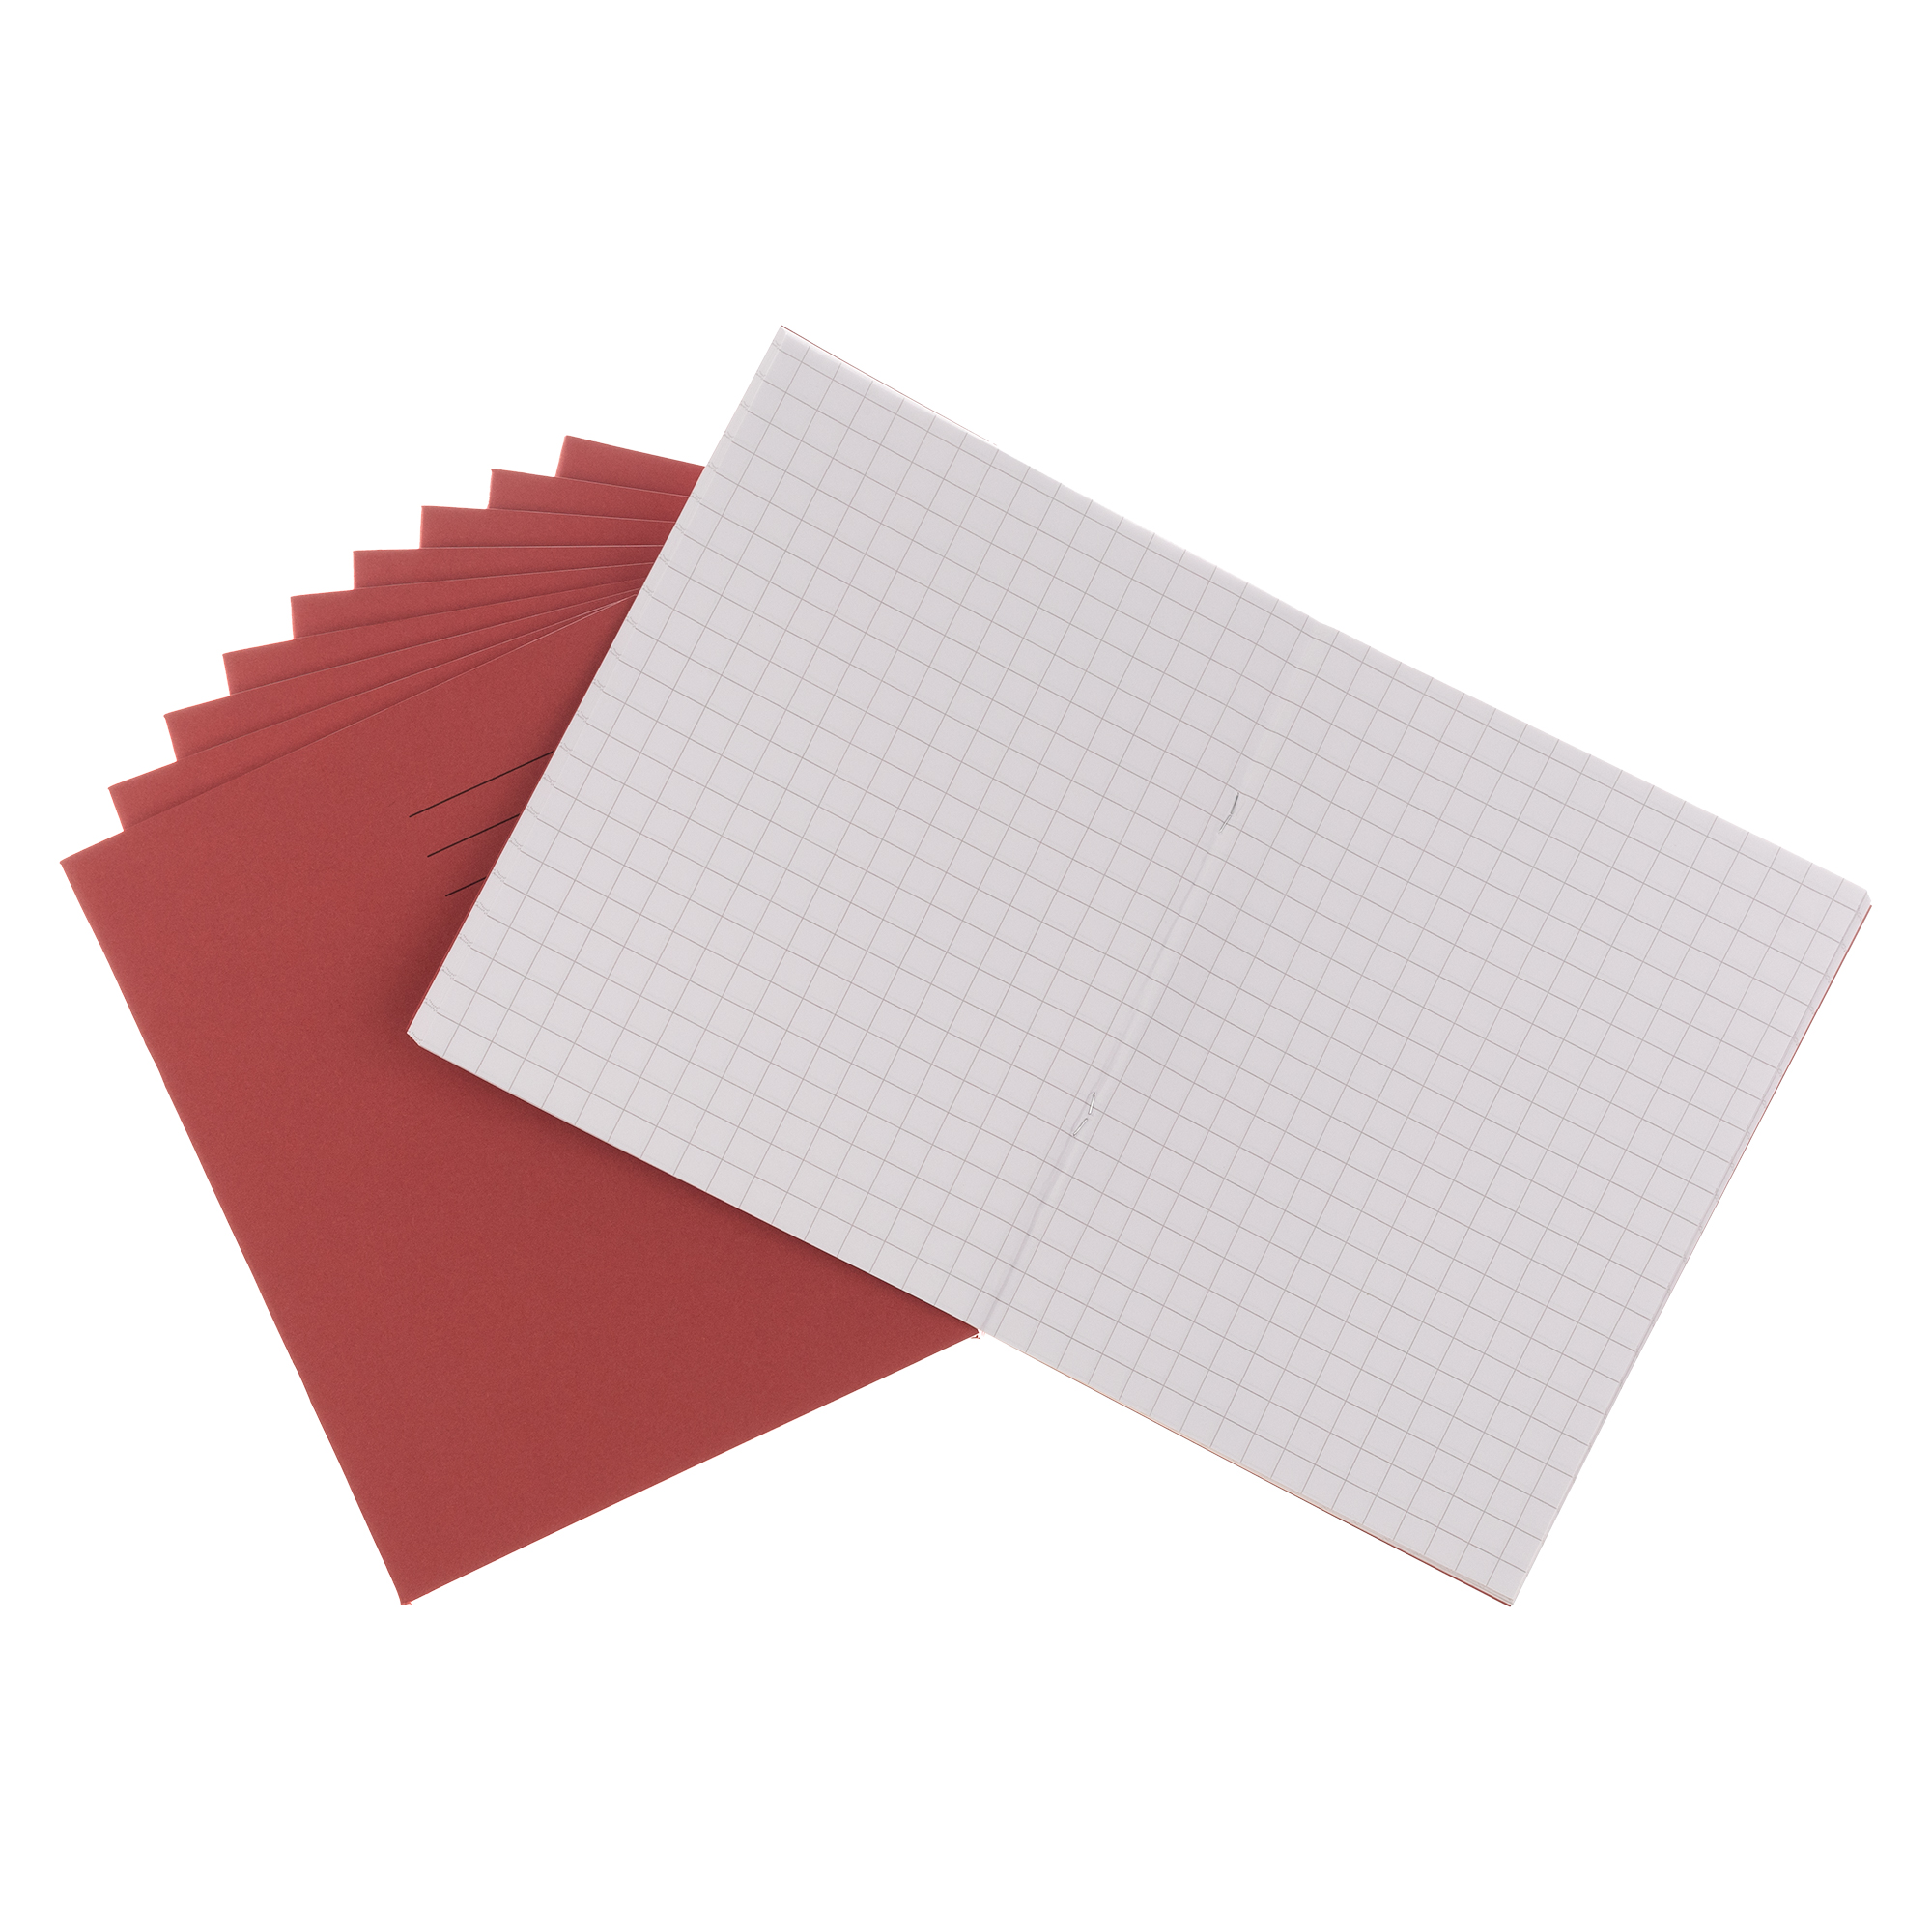 9x7 10mm Sq 80pg Red P100